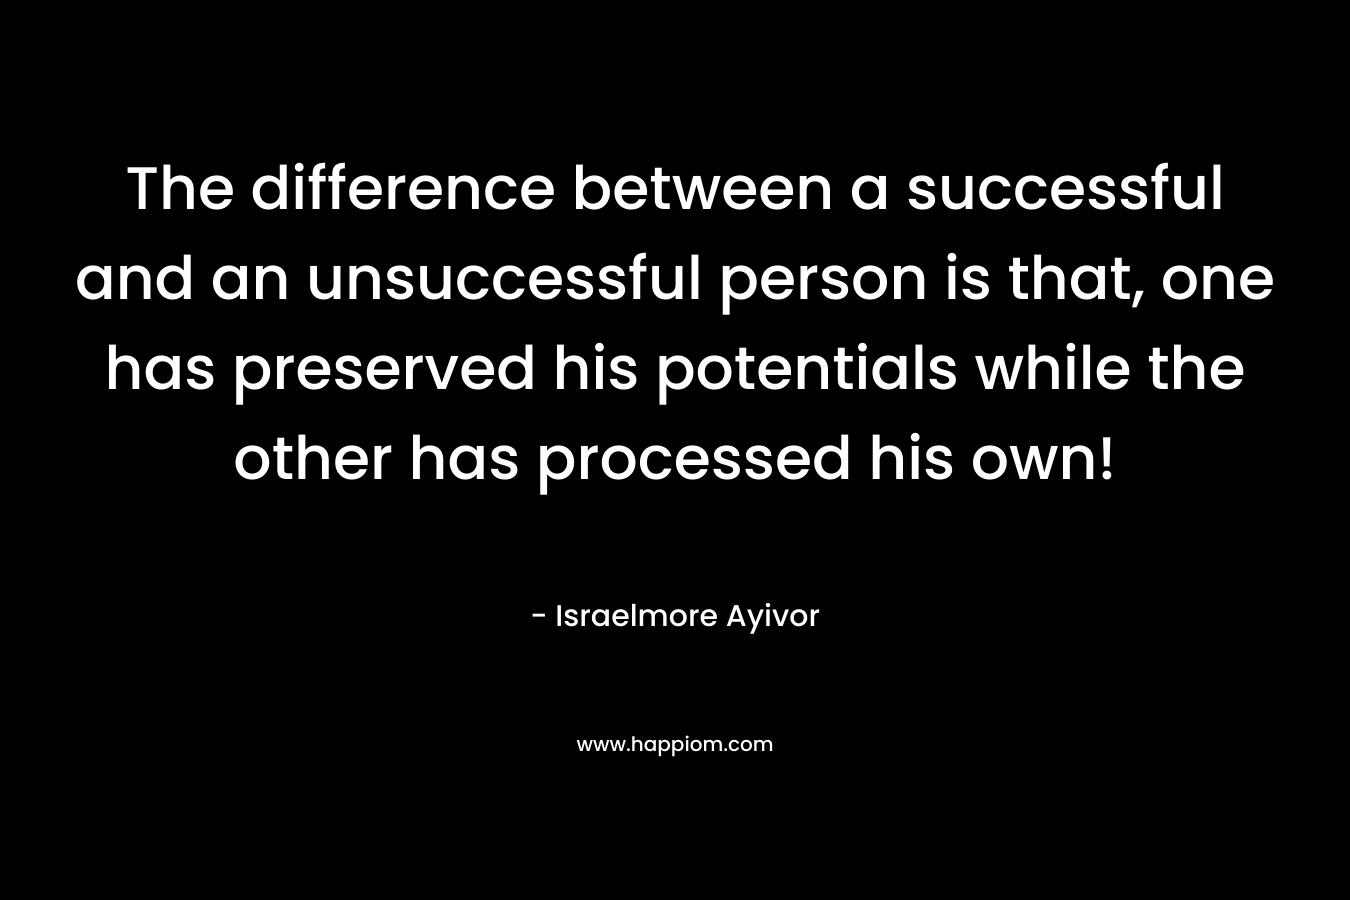 The difference between a successful and an unsuccessful person is that, one has preserved his potentials while the other has processed his own!